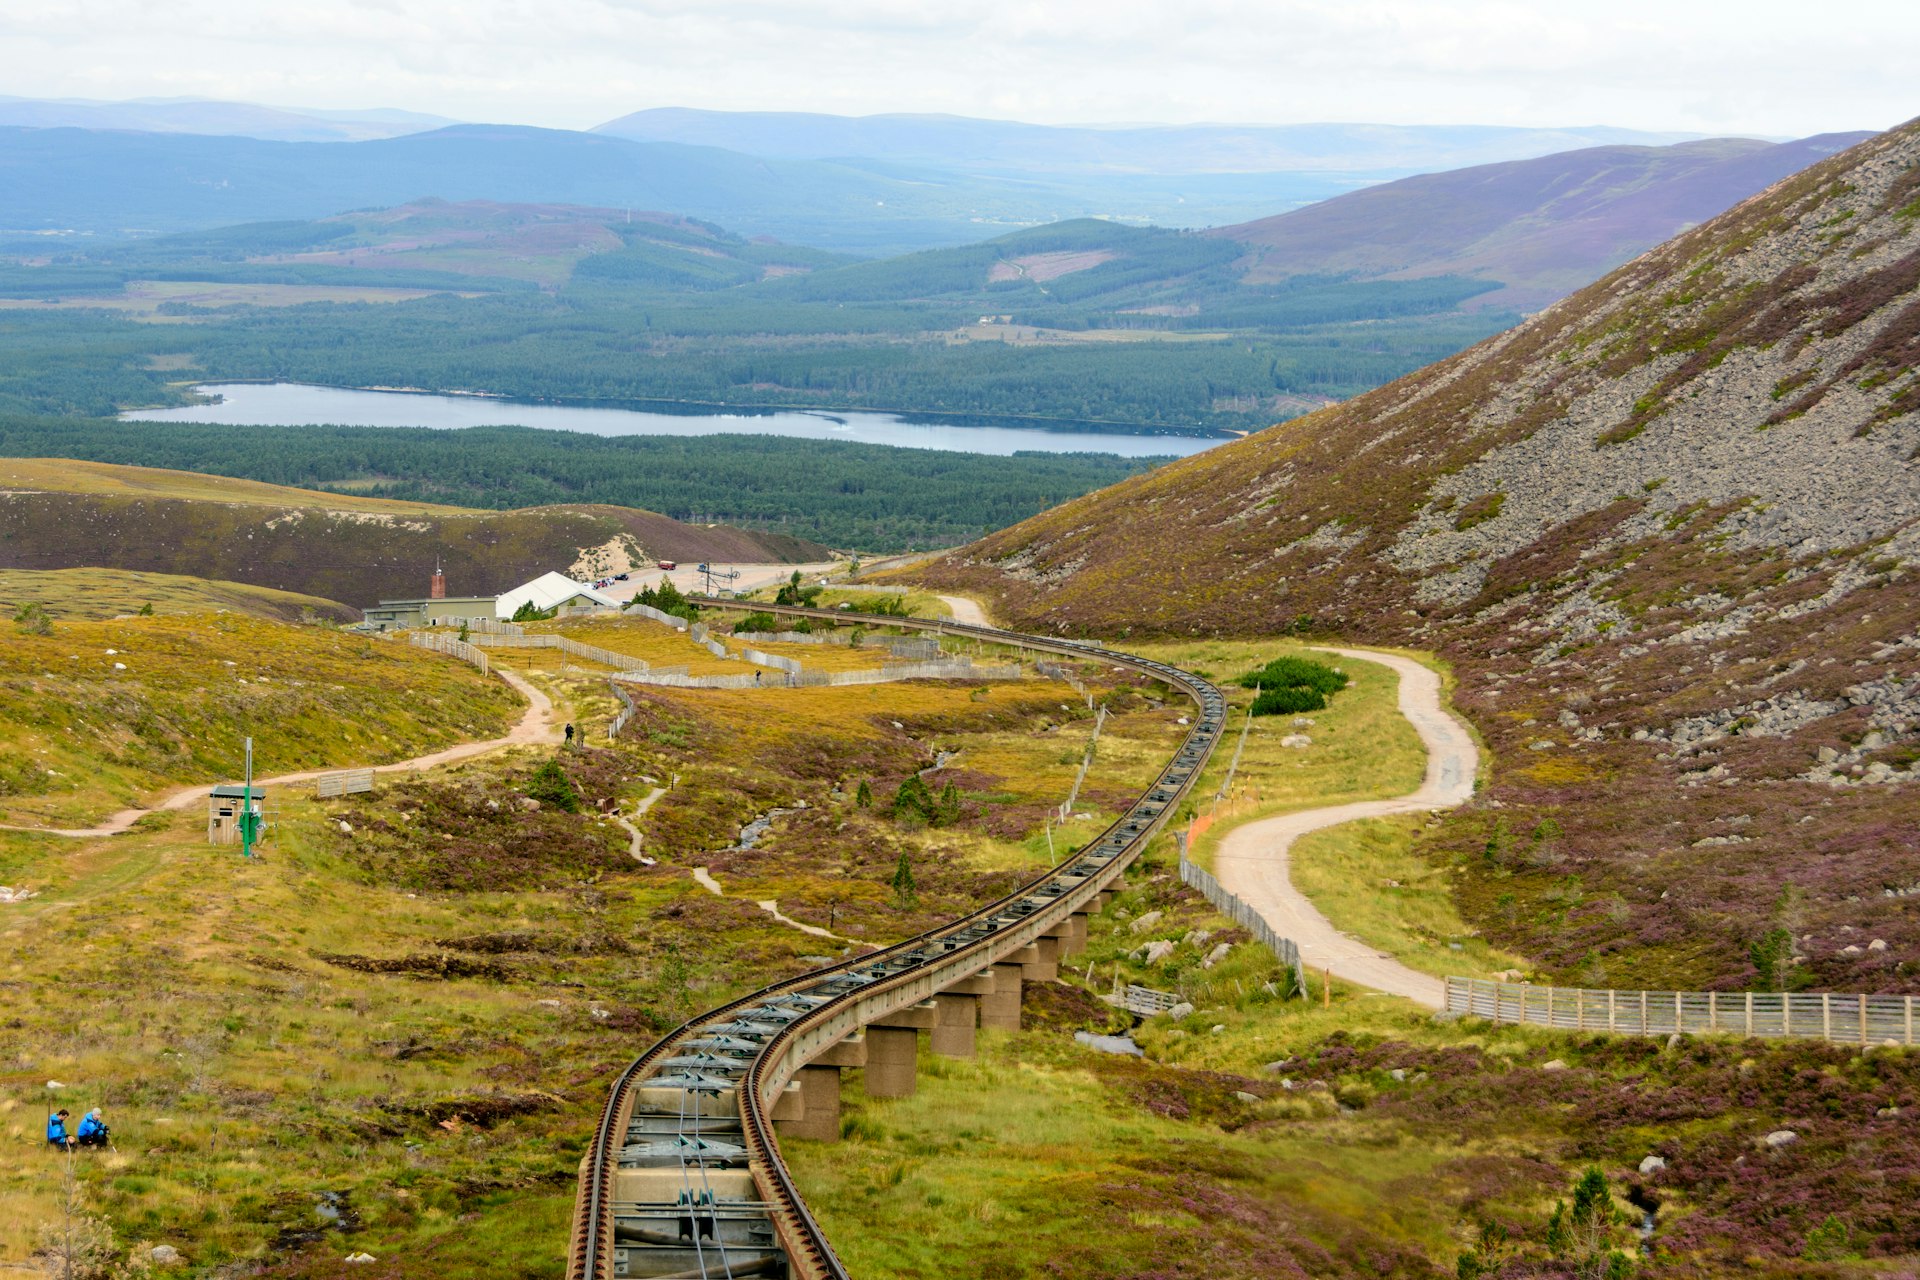 Funicular train tracks on the slopes of Cairn Gorm, Scotland